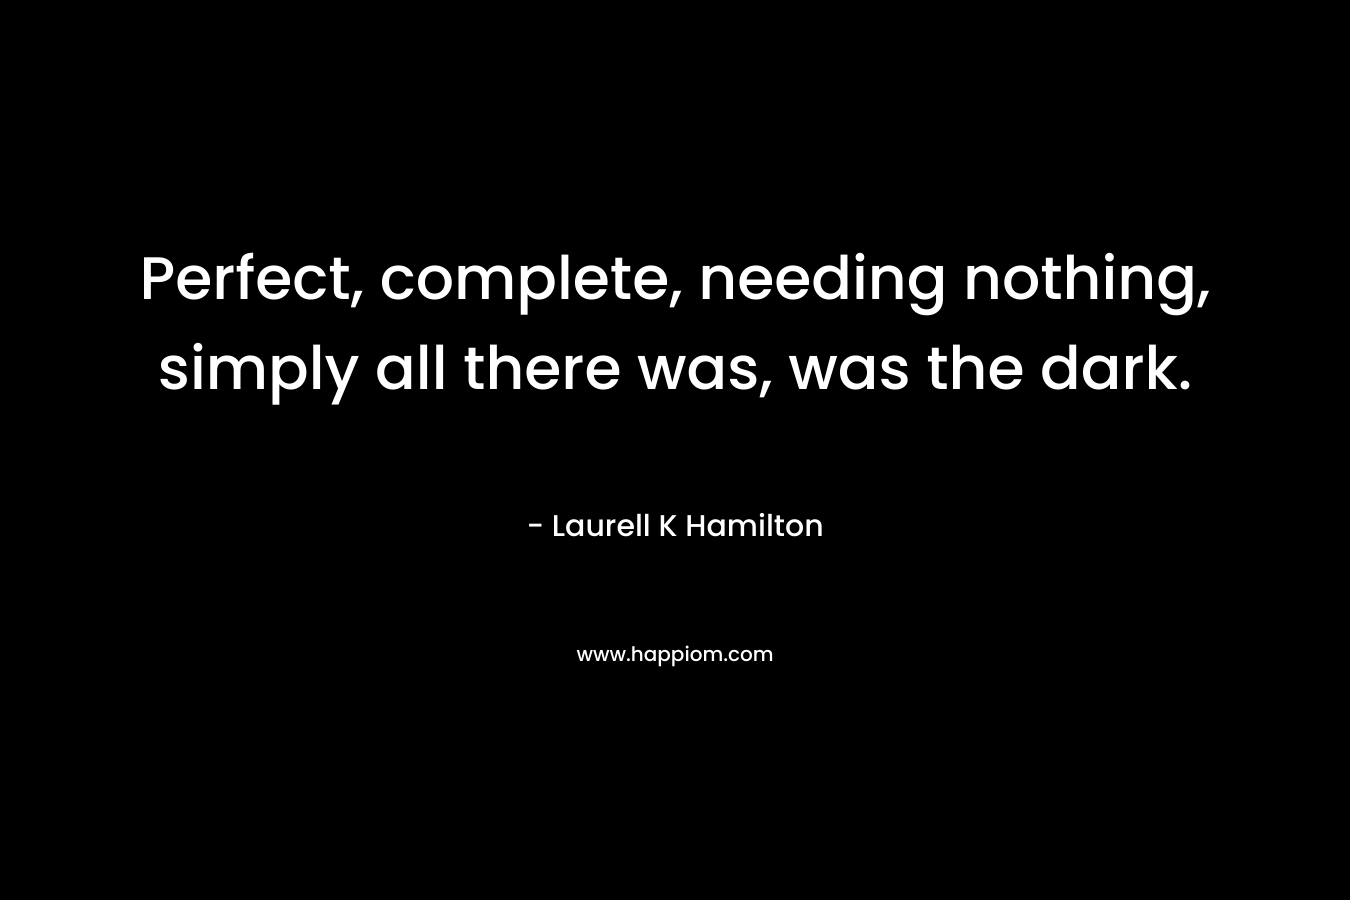 Perfect, complete, needing nothing, simply all there was, was the dark. – Laurell K Hamilton